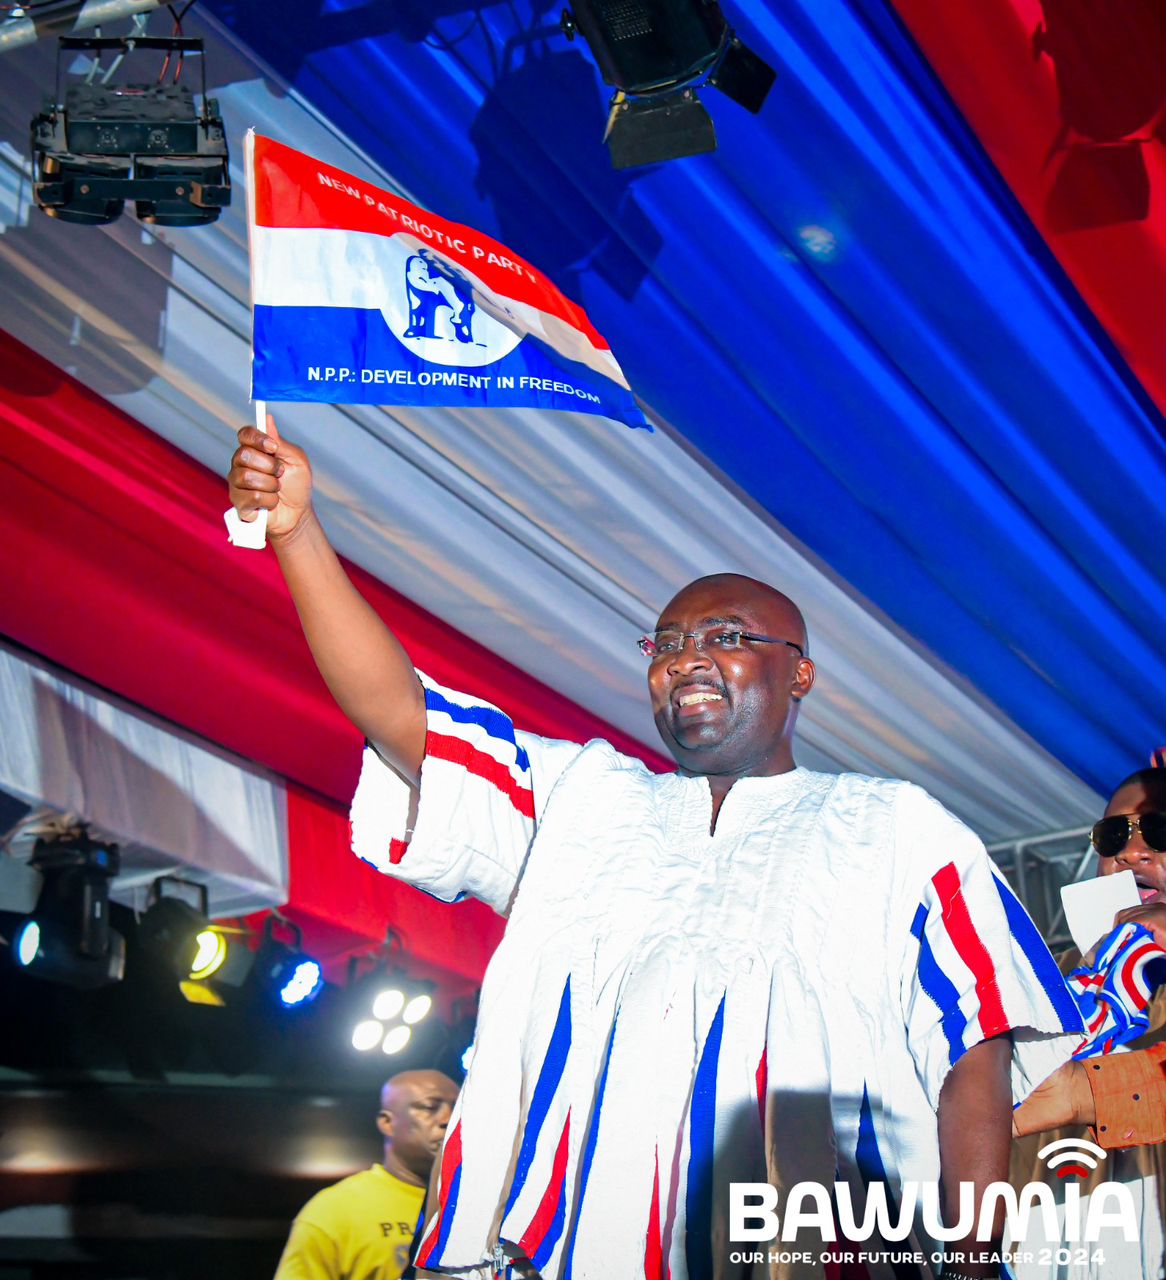 \'Be serious; don\'t campaign like you\'re running for SRC elections\' - Former MP advises Bawumia